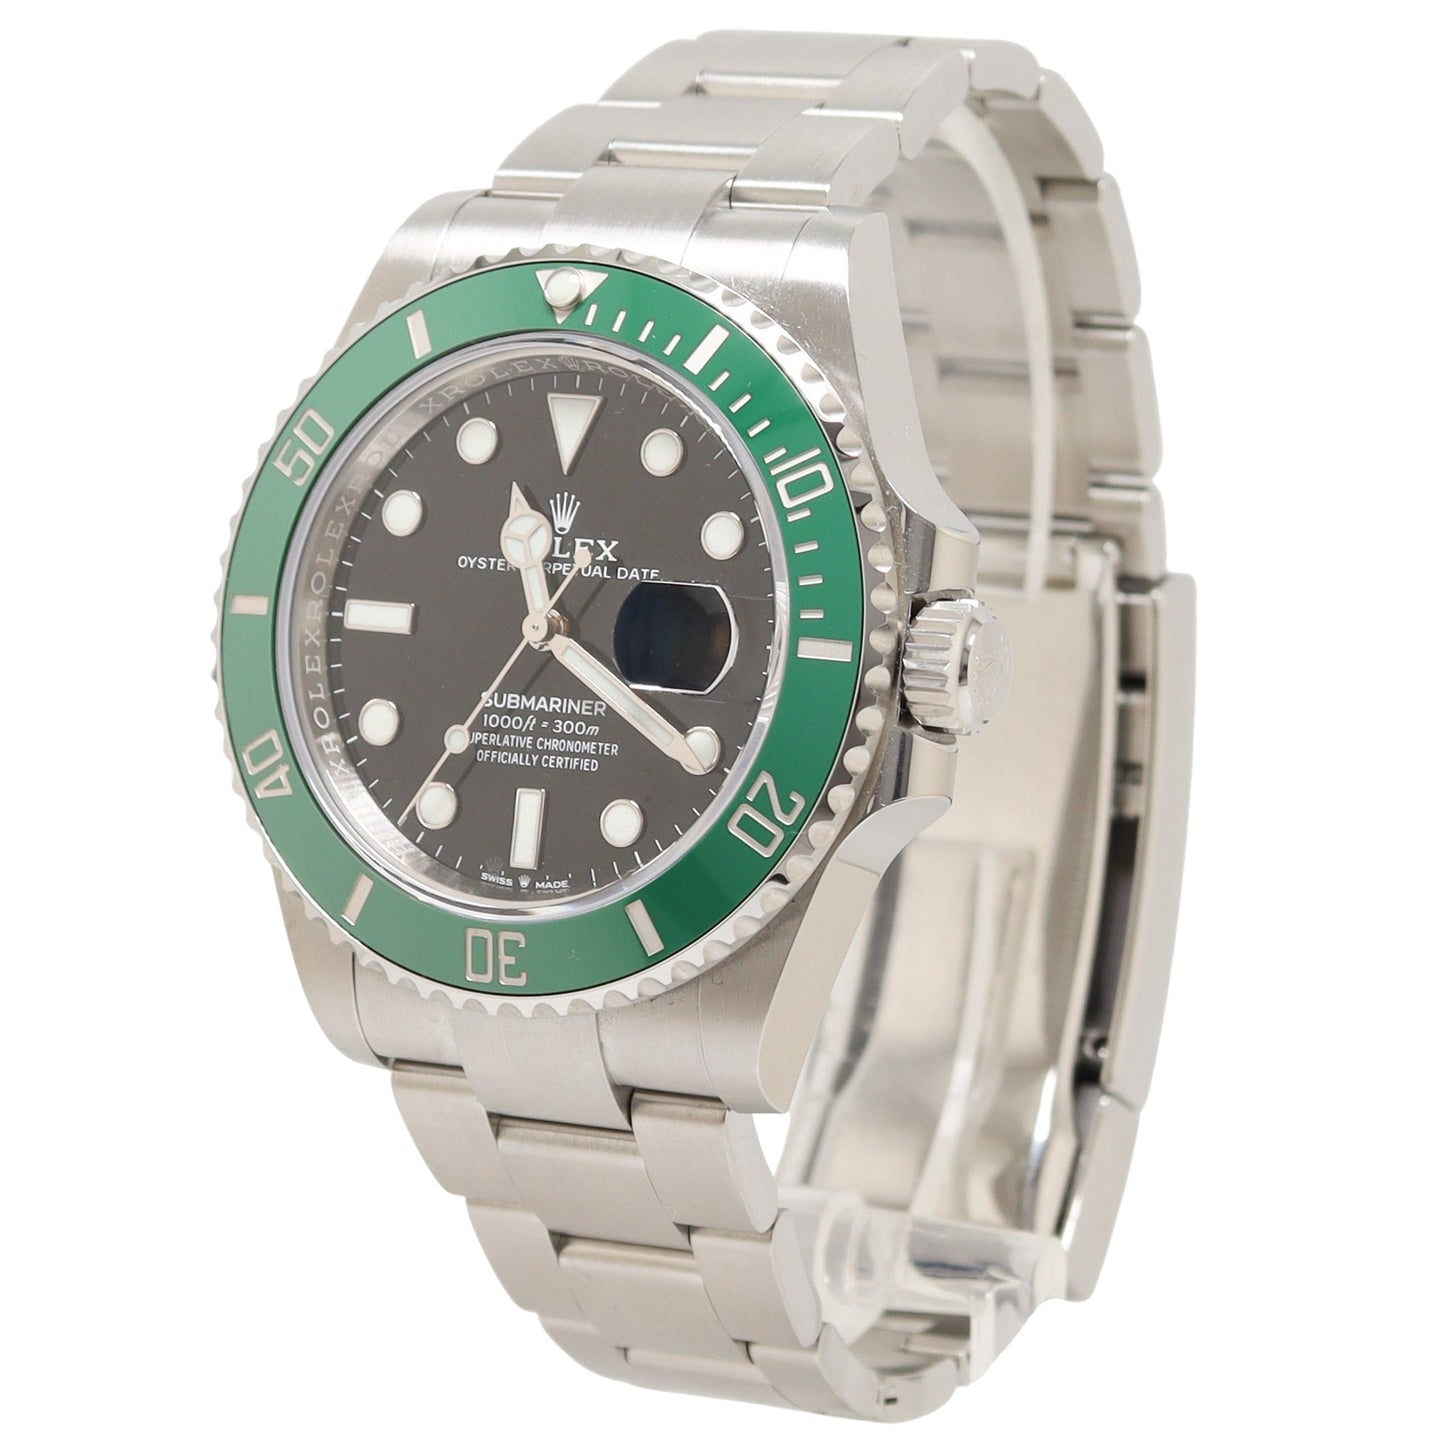 Rolex Men's Submariner Date "Starbucks" Stainless Steel 41mm Black Dot Dial Watch Reference: 126610LV - Happy Jewelers Fine Jewelry Lifetime Warranty